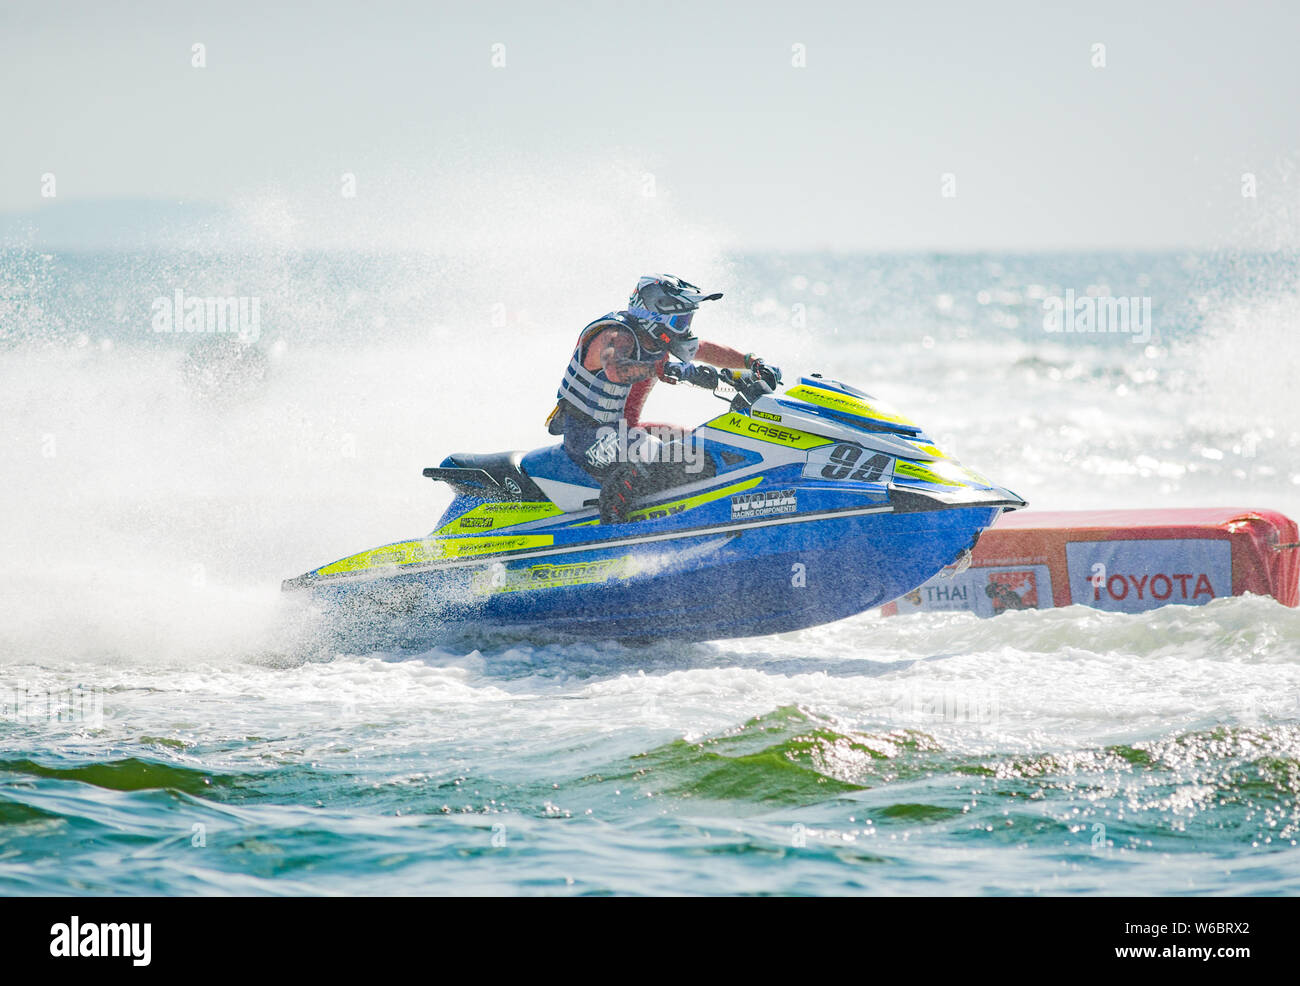 Pattaya, Thailand - December 9, 2017: Mitchell Casey from Australia competing in the Pro-Am Runabout Stock Class of the International Jet Ski World Cu Stock Photo